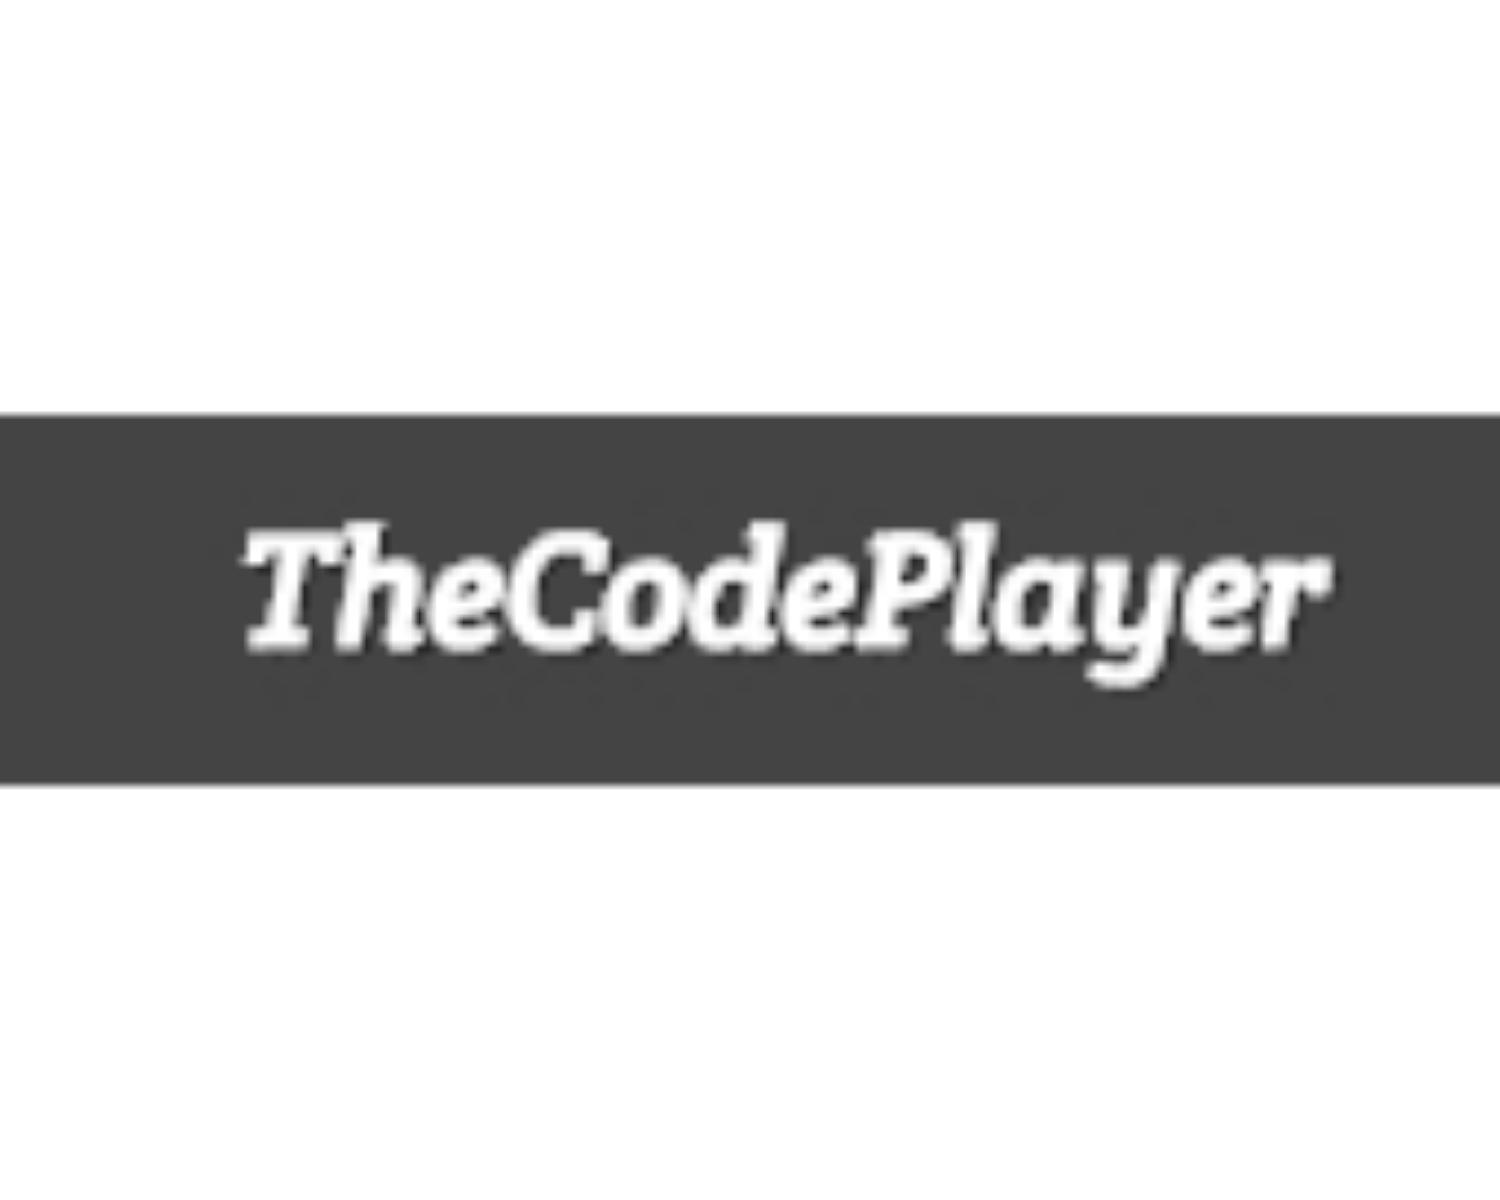 THE CODE PLAYER